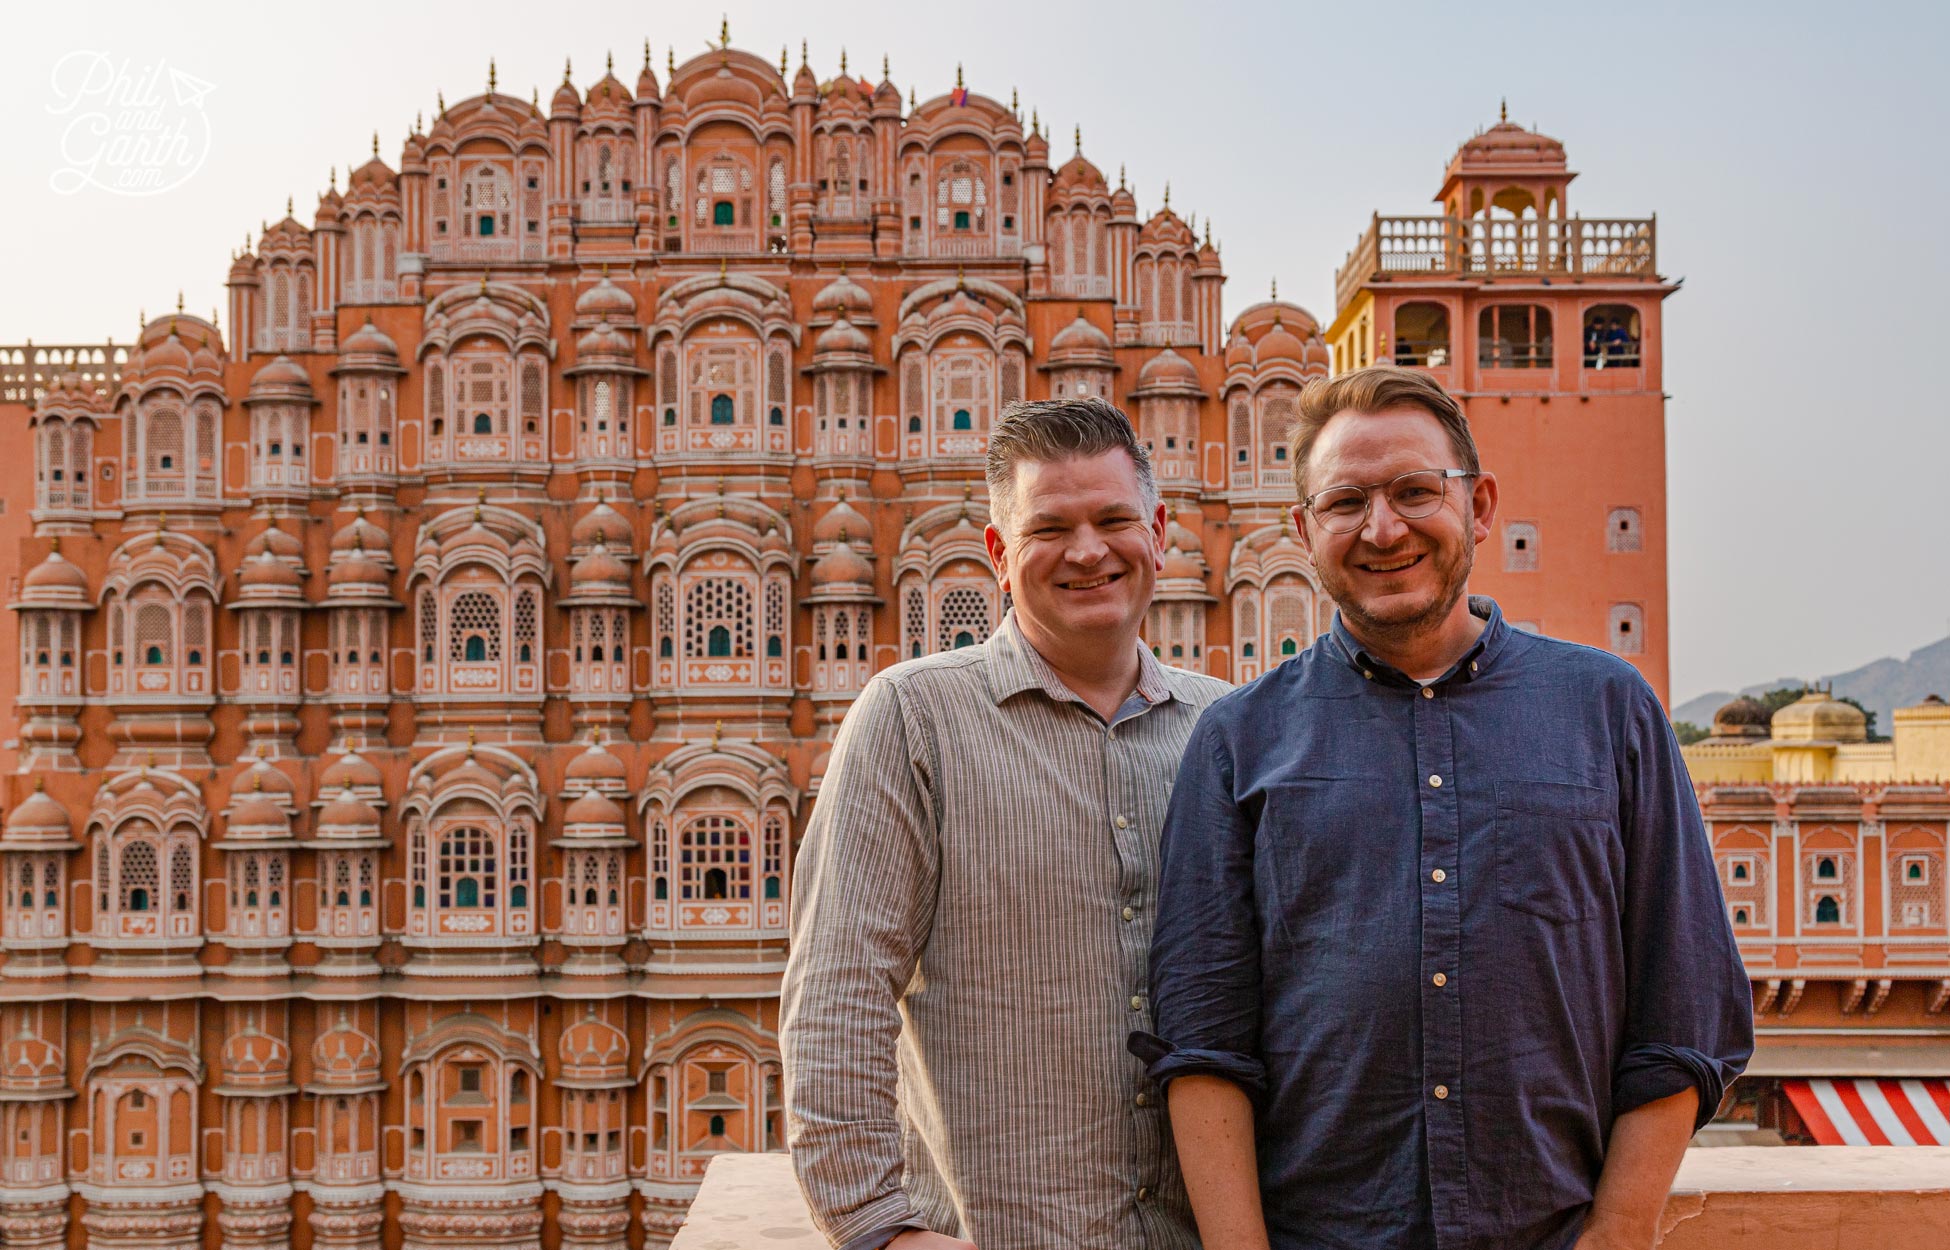 Phil and Garth at Hawa Mahal - Photo taken from The Wind View Cafe opposite